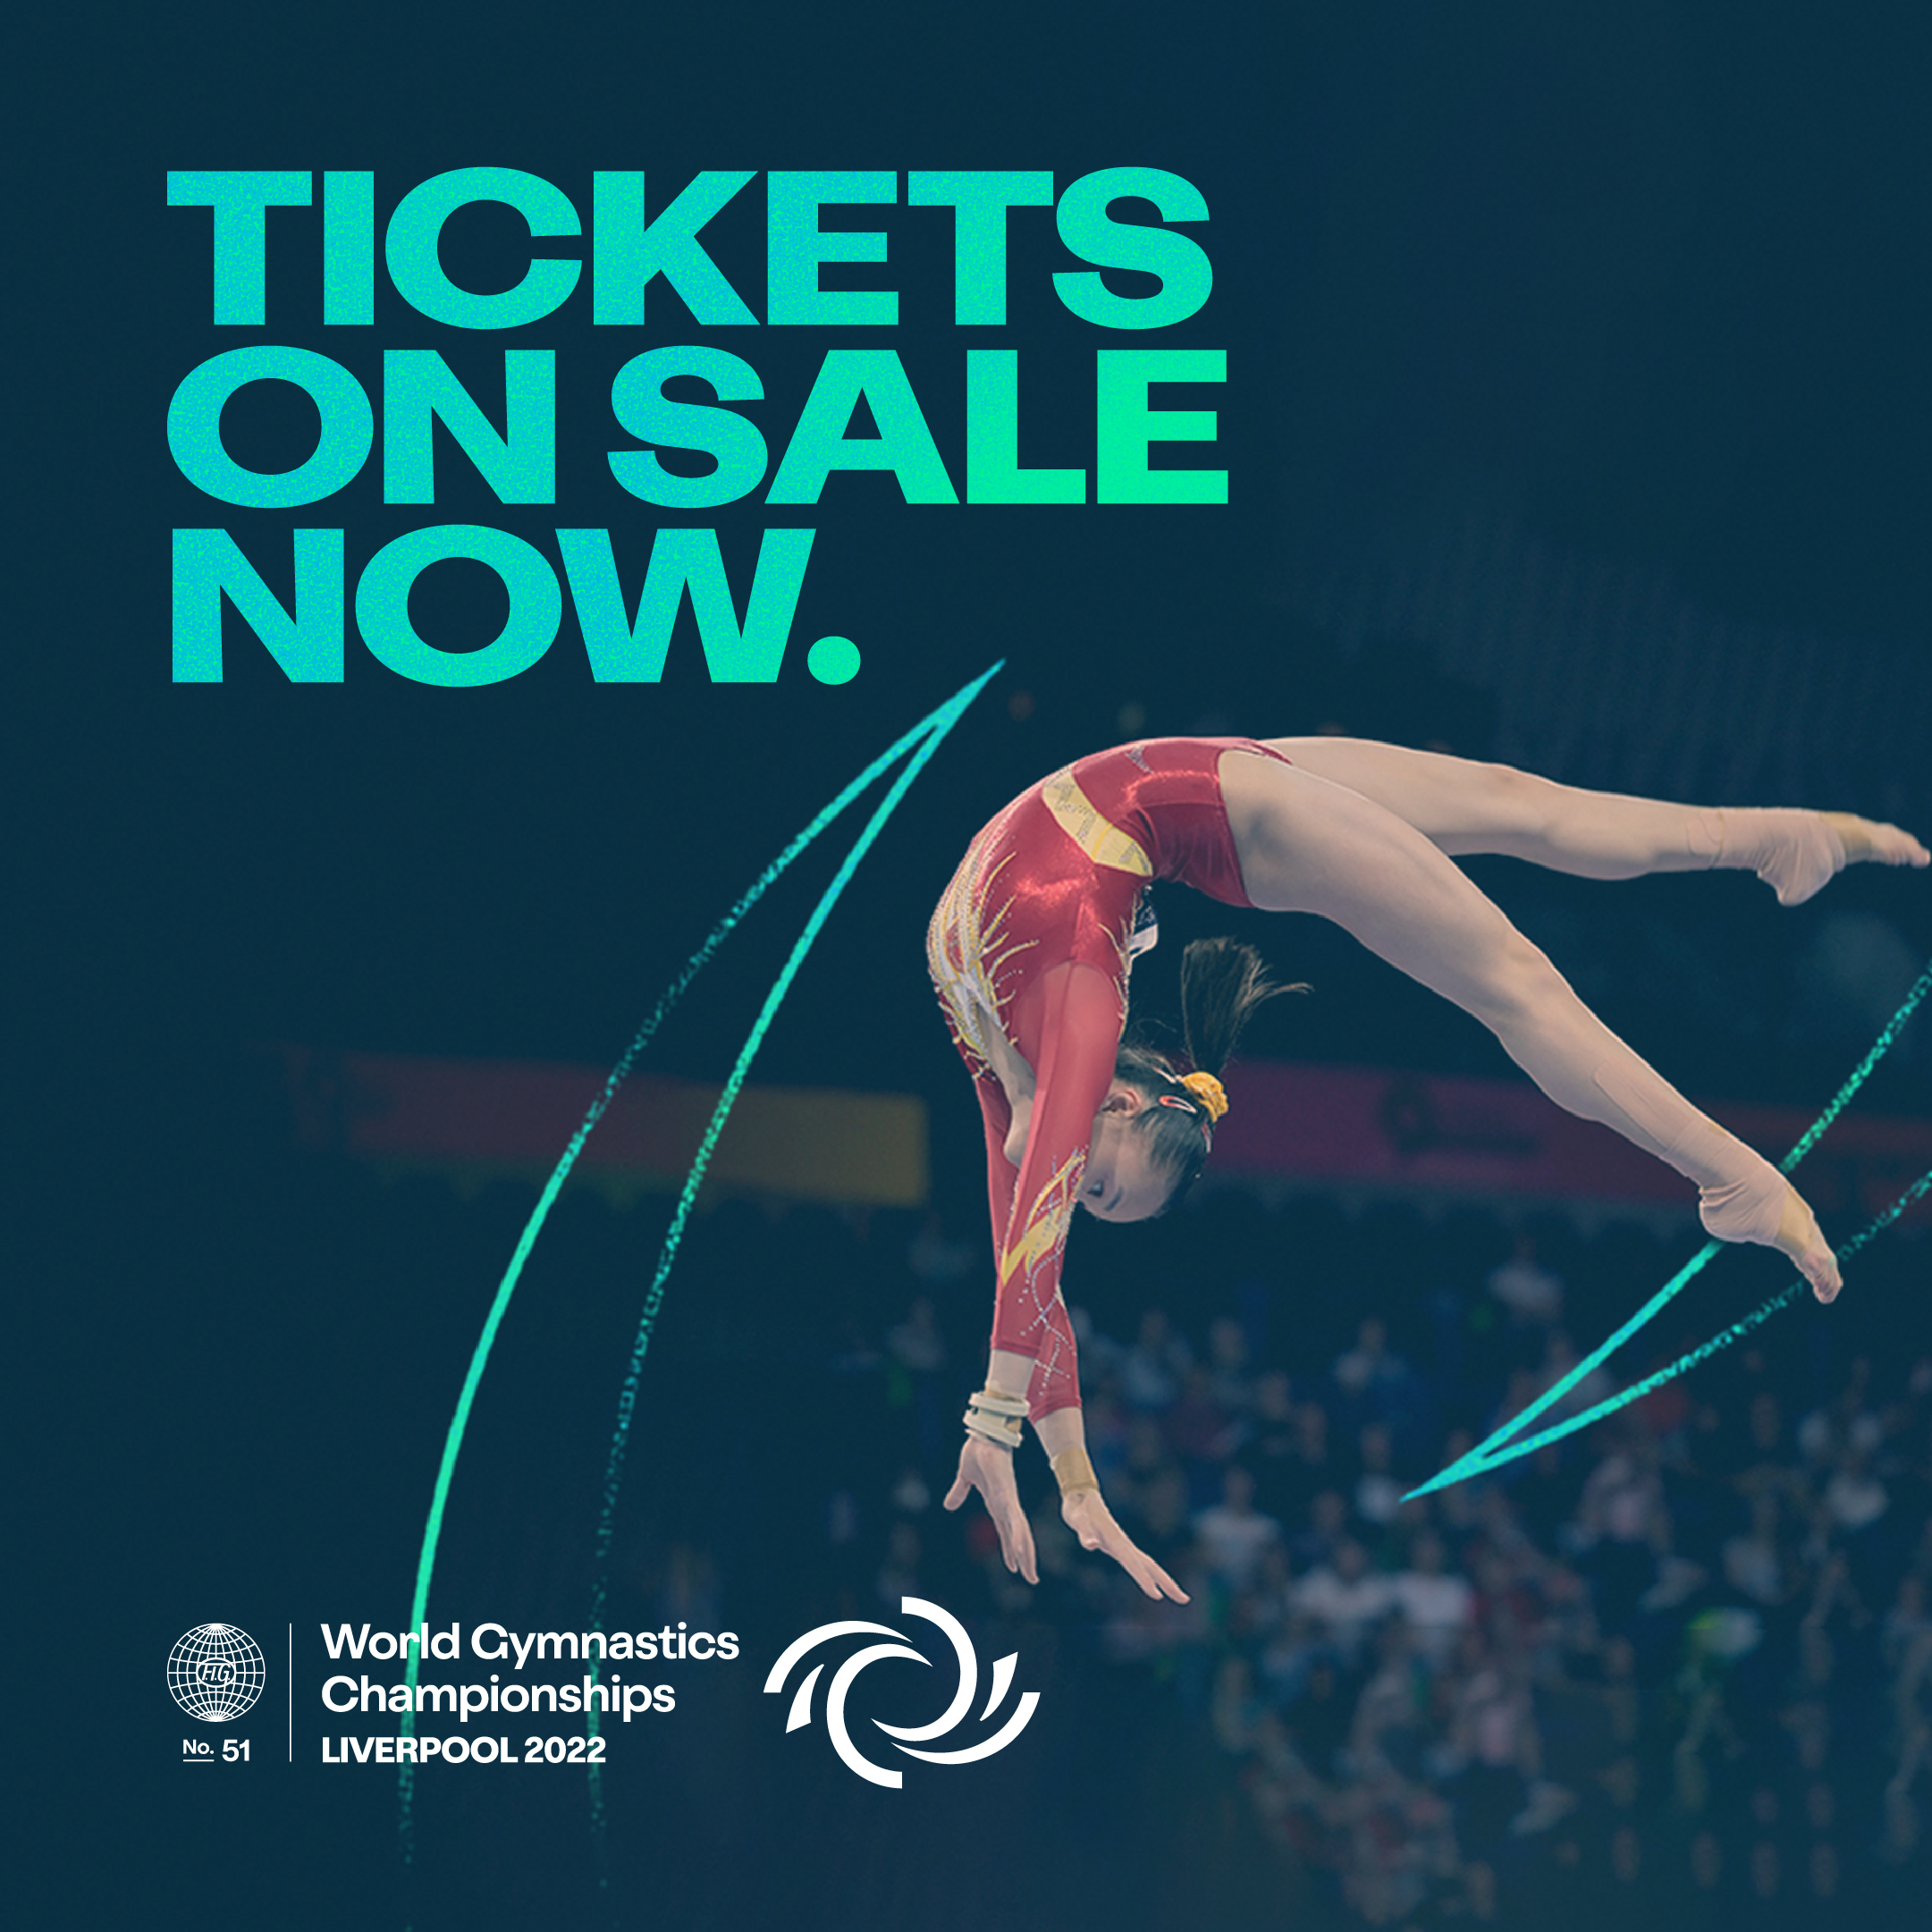 World’s best gymnasts to go headtohead in Liverpool Culture Liverpool